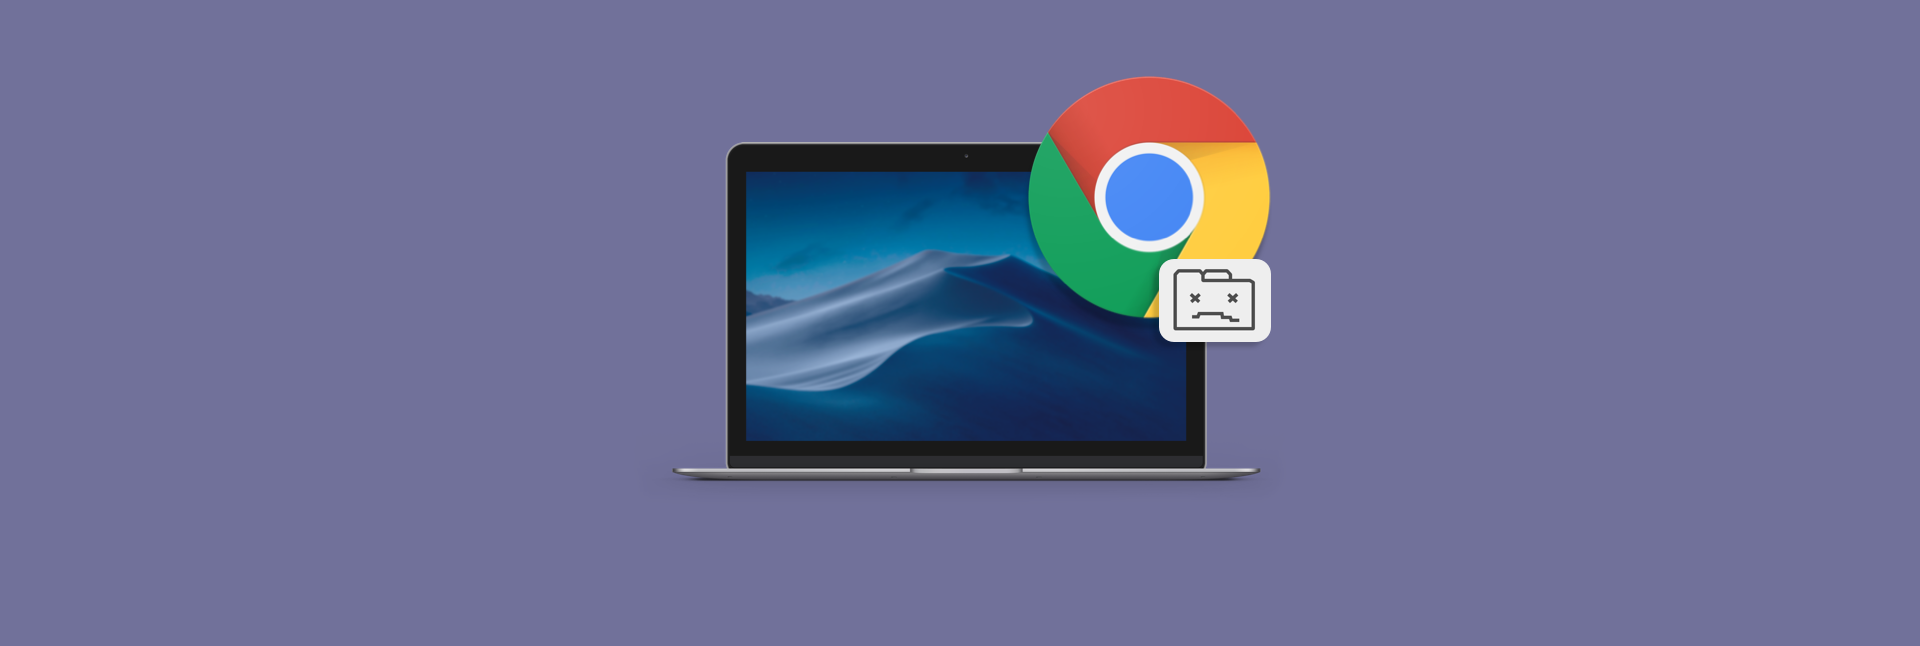 how to install google chrome on macbook air